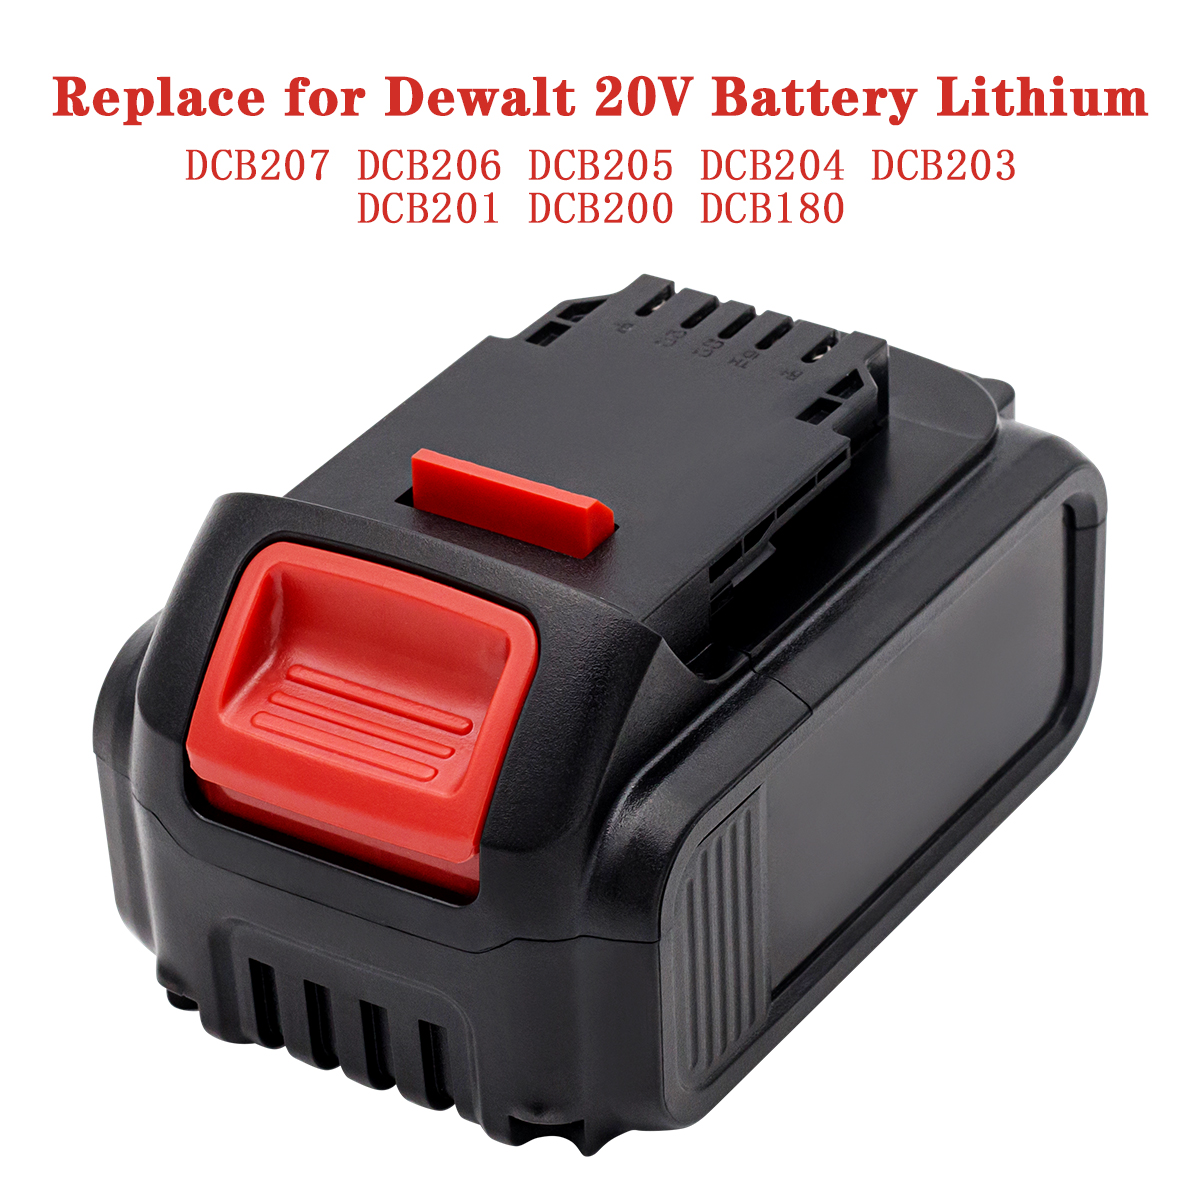 20V-60Ah-Replaceable-Power-Tool-Battery-Replacement-For-Dew-DCB200-DCB180-DCB181-DCB182-DCB184-DCB20-1787020-3